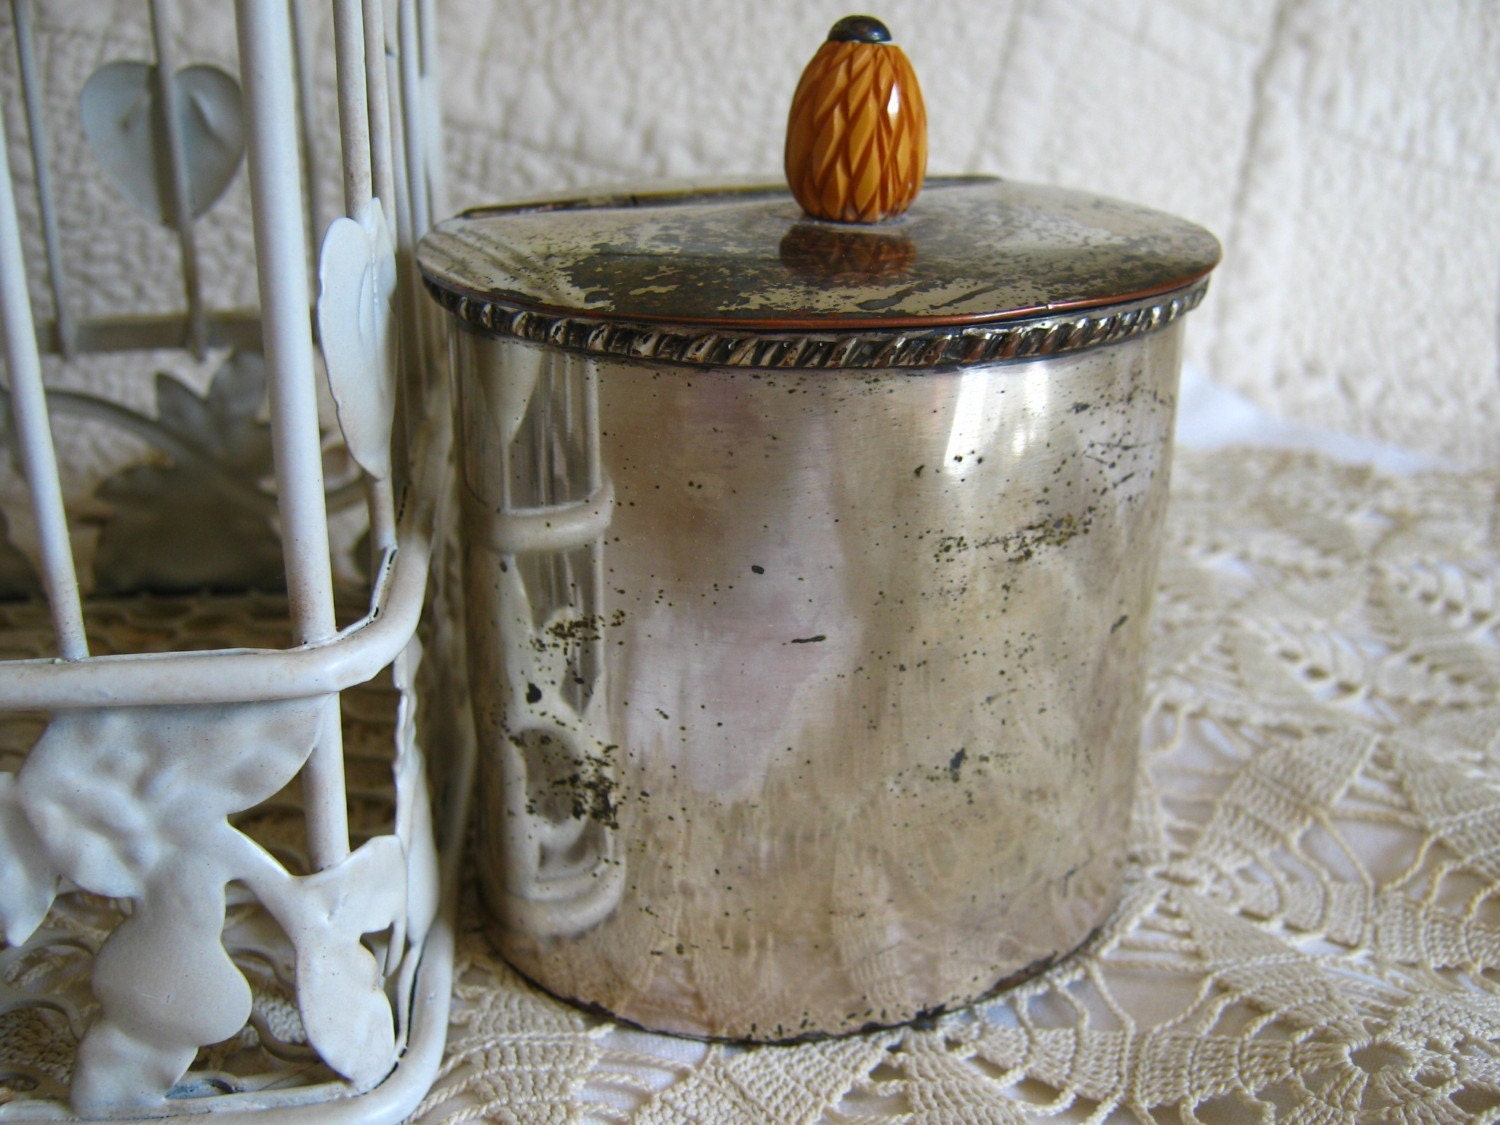 Vintage, Silver Hinged Container, Shabby Chic, Paris Apartment, Cigarette Holder